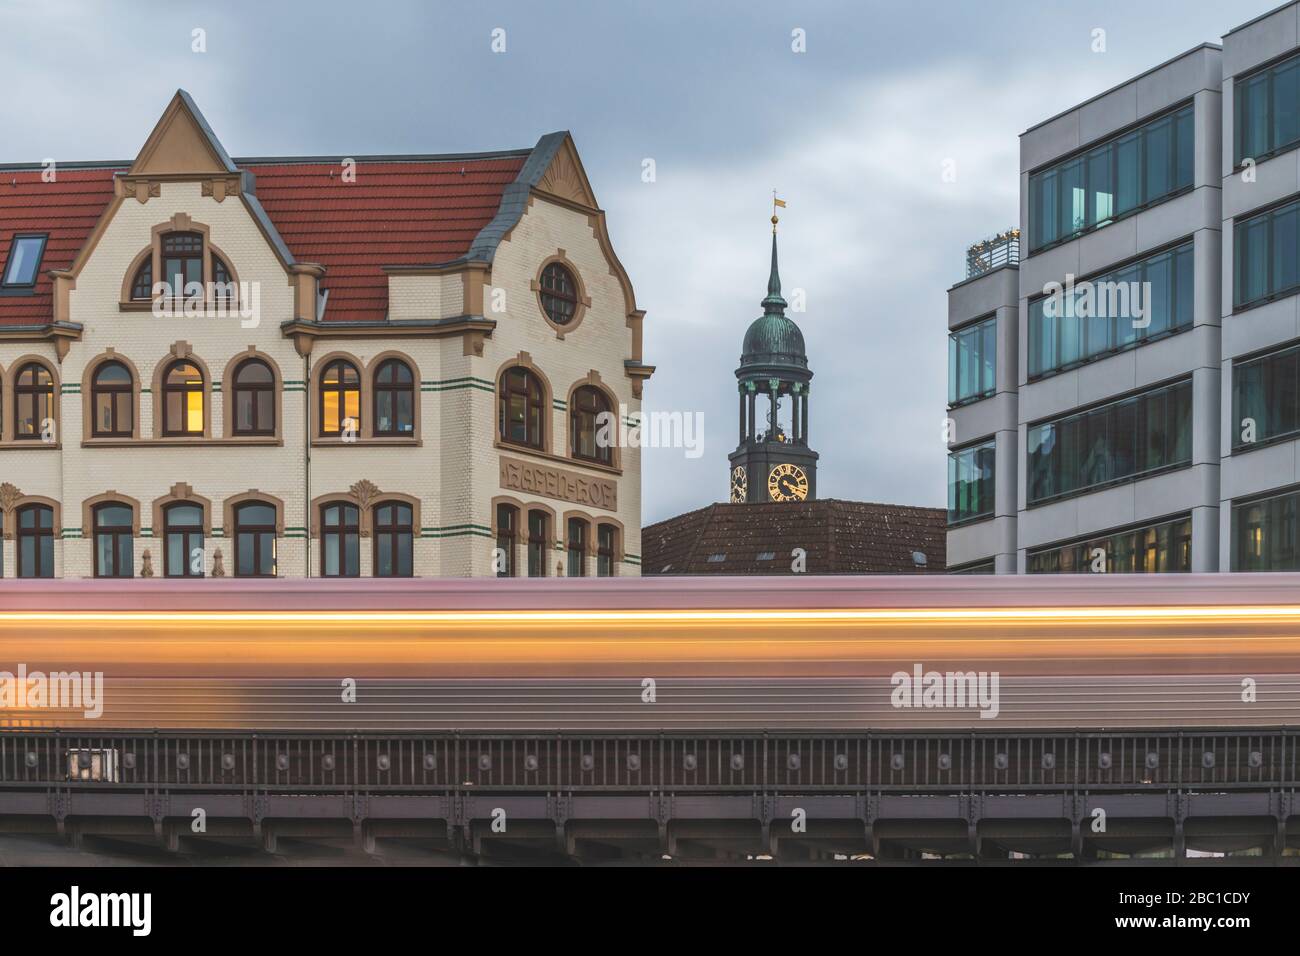 Germany, Hamburg, Blurred motion of elevated train passing residential building with tower of Saint Michaels Church in background Stock Photo